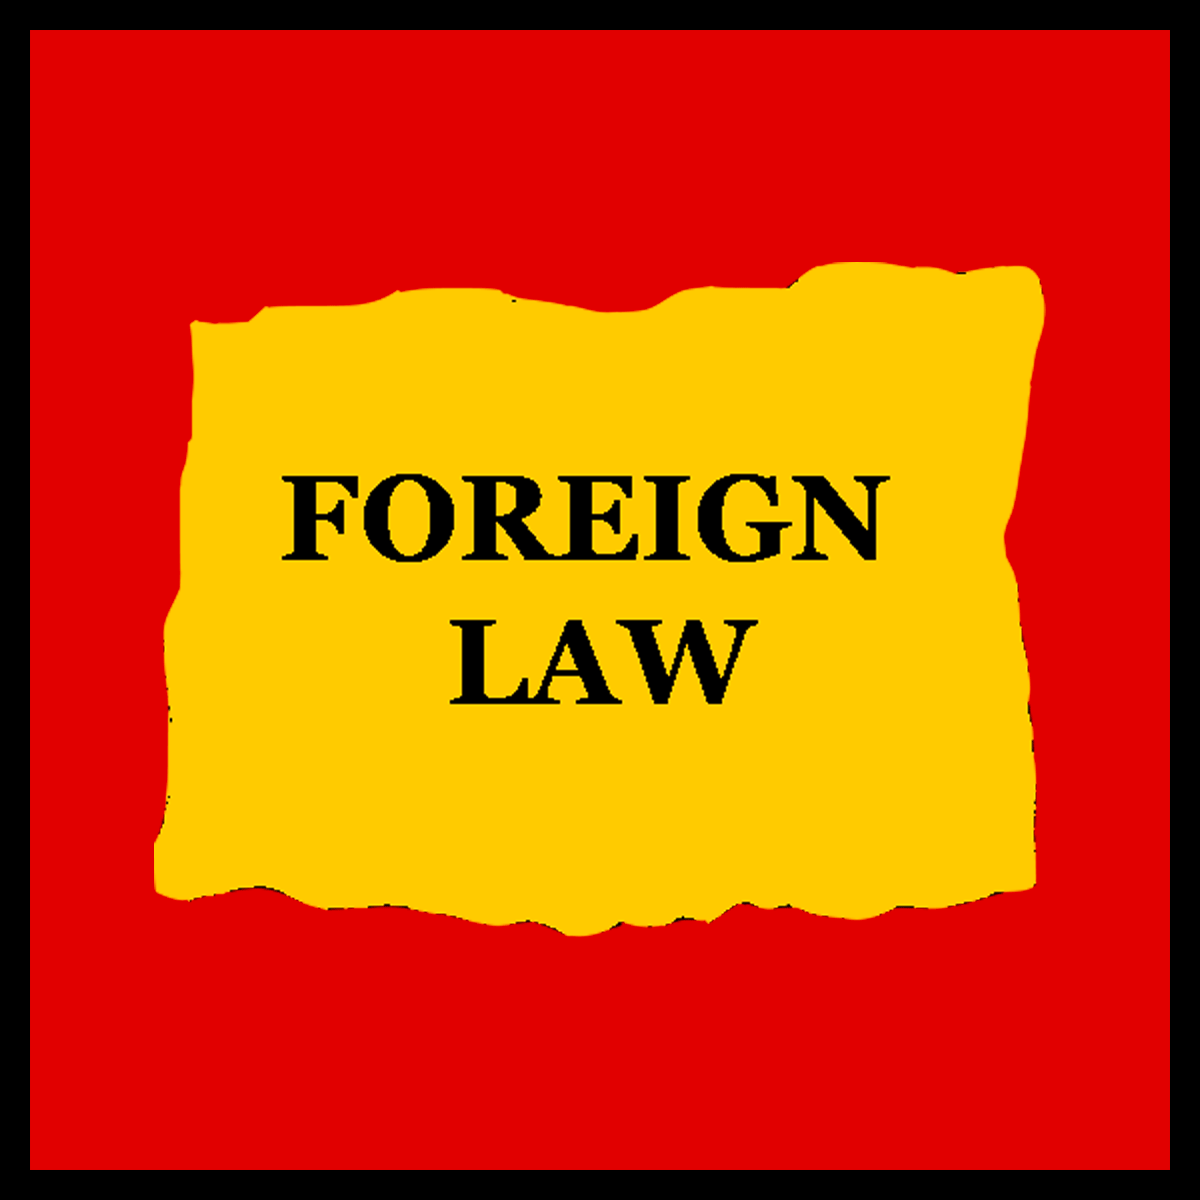 Foreign Law Image